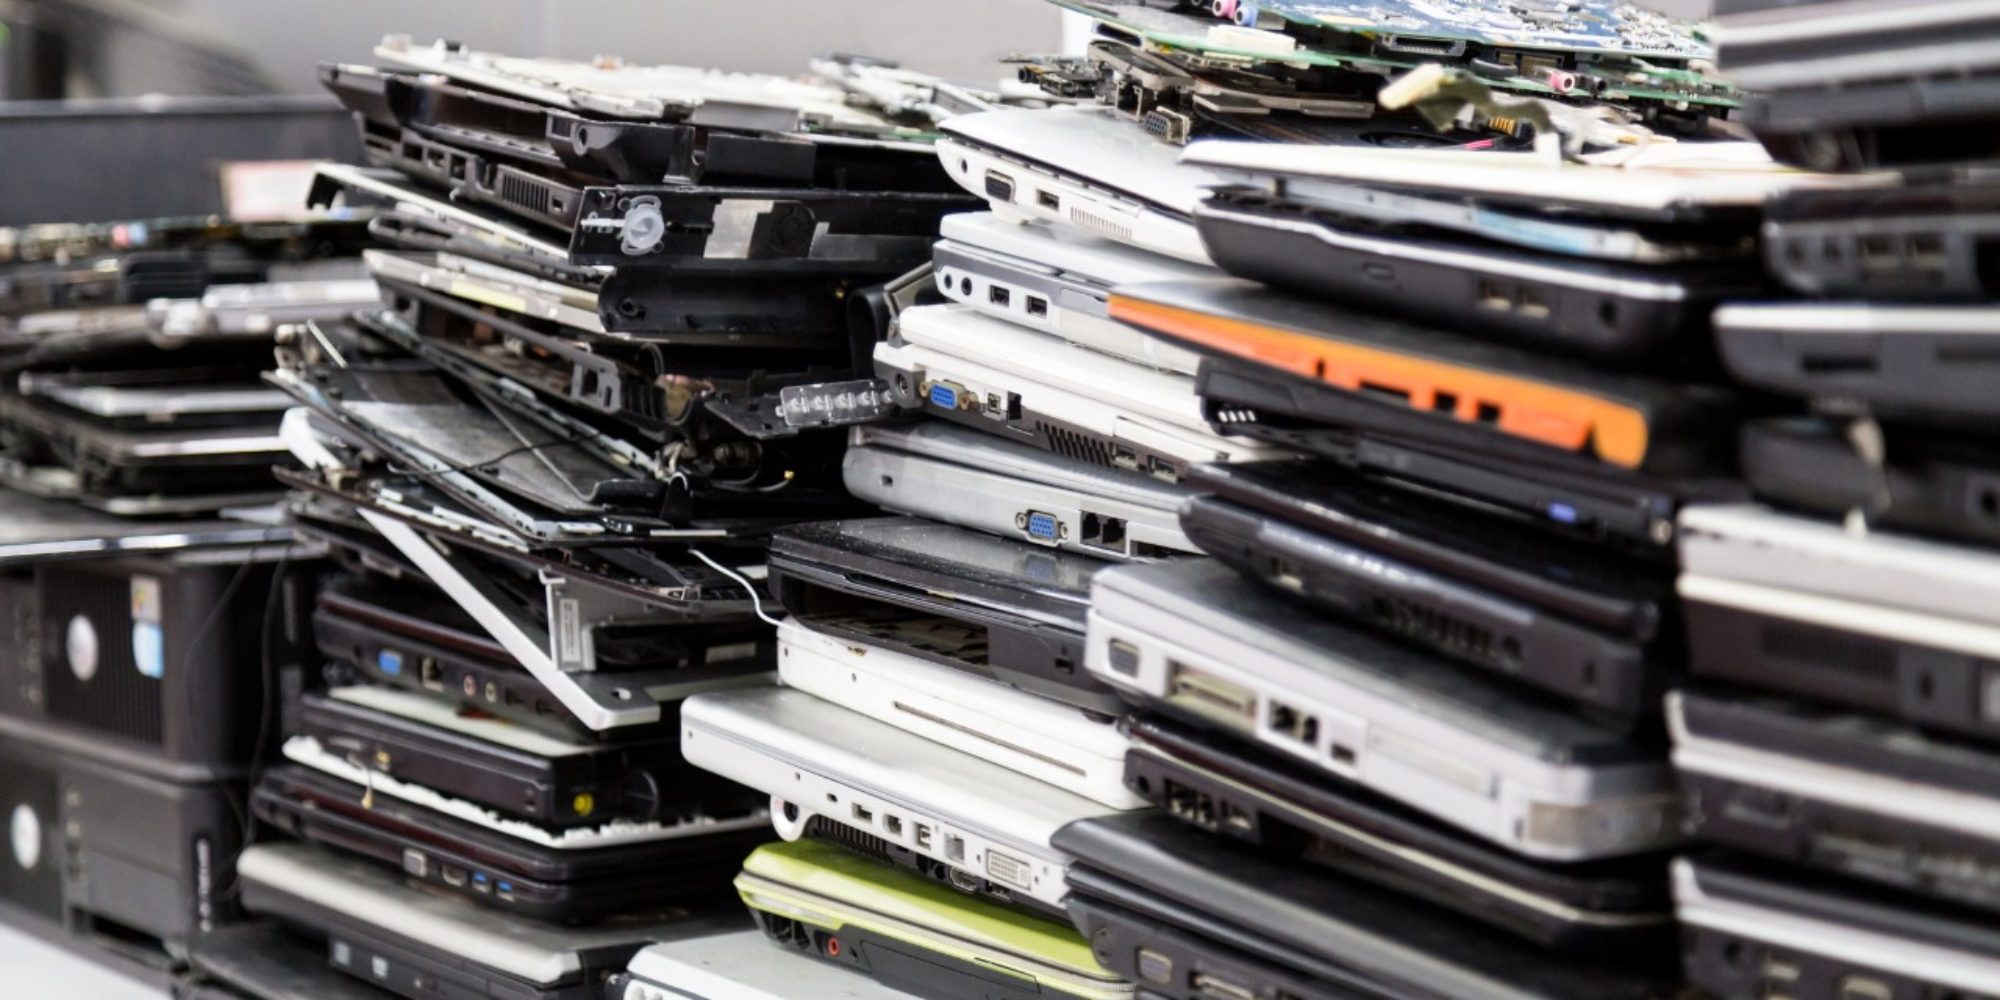 Please Dispose of Old Electronics Responsibly—Not in the Trash or Standard Recycling!